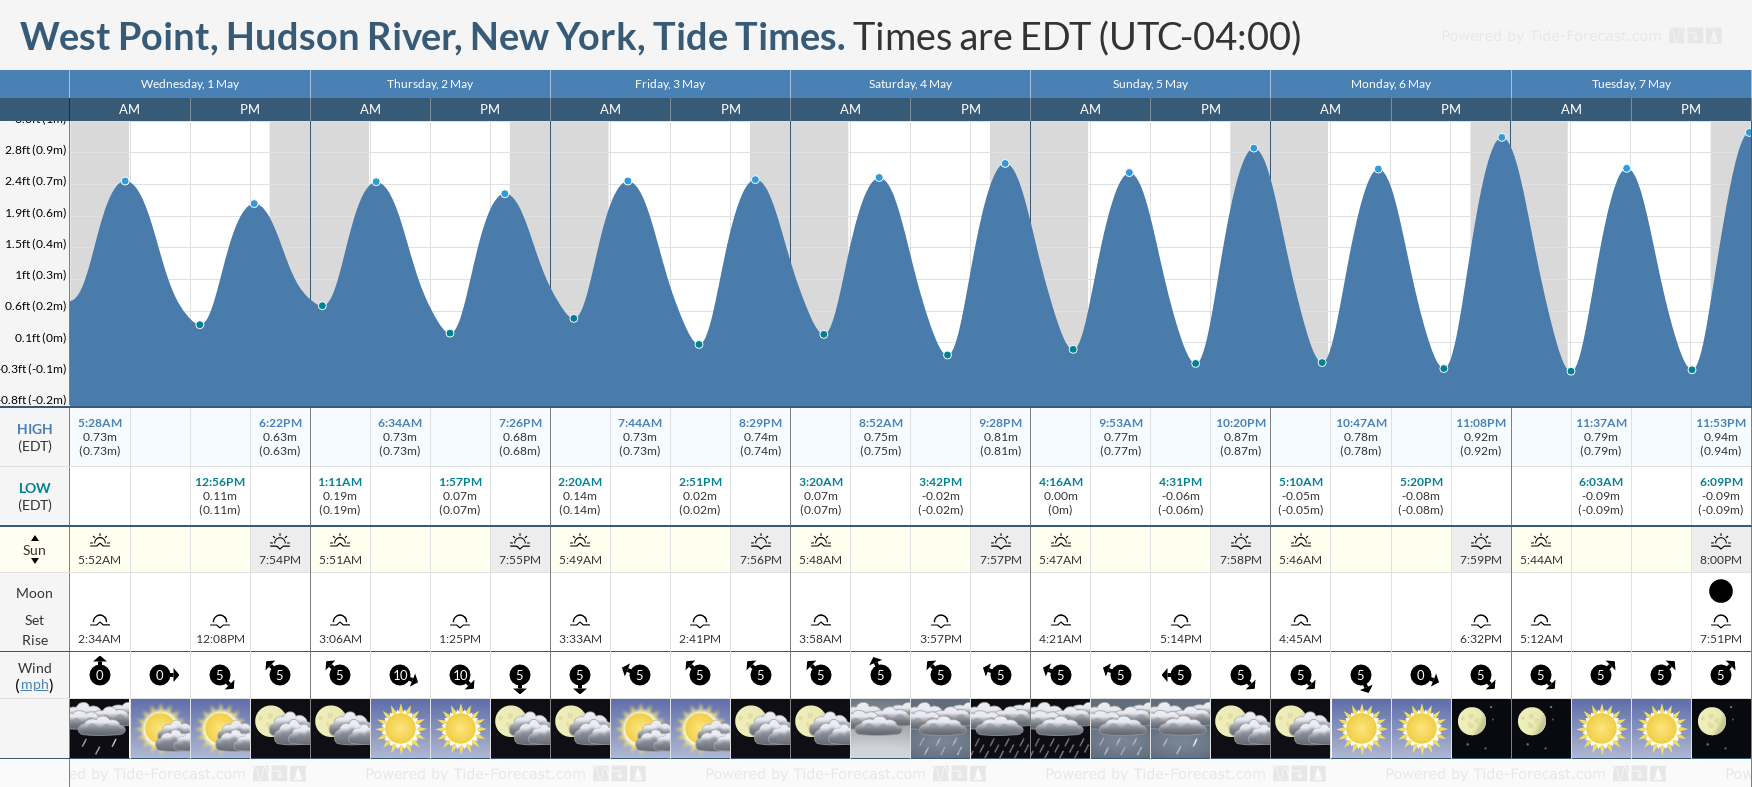 West Point, Hudson River, New York Tide Chart including high and low tide tide times for the next 7 days